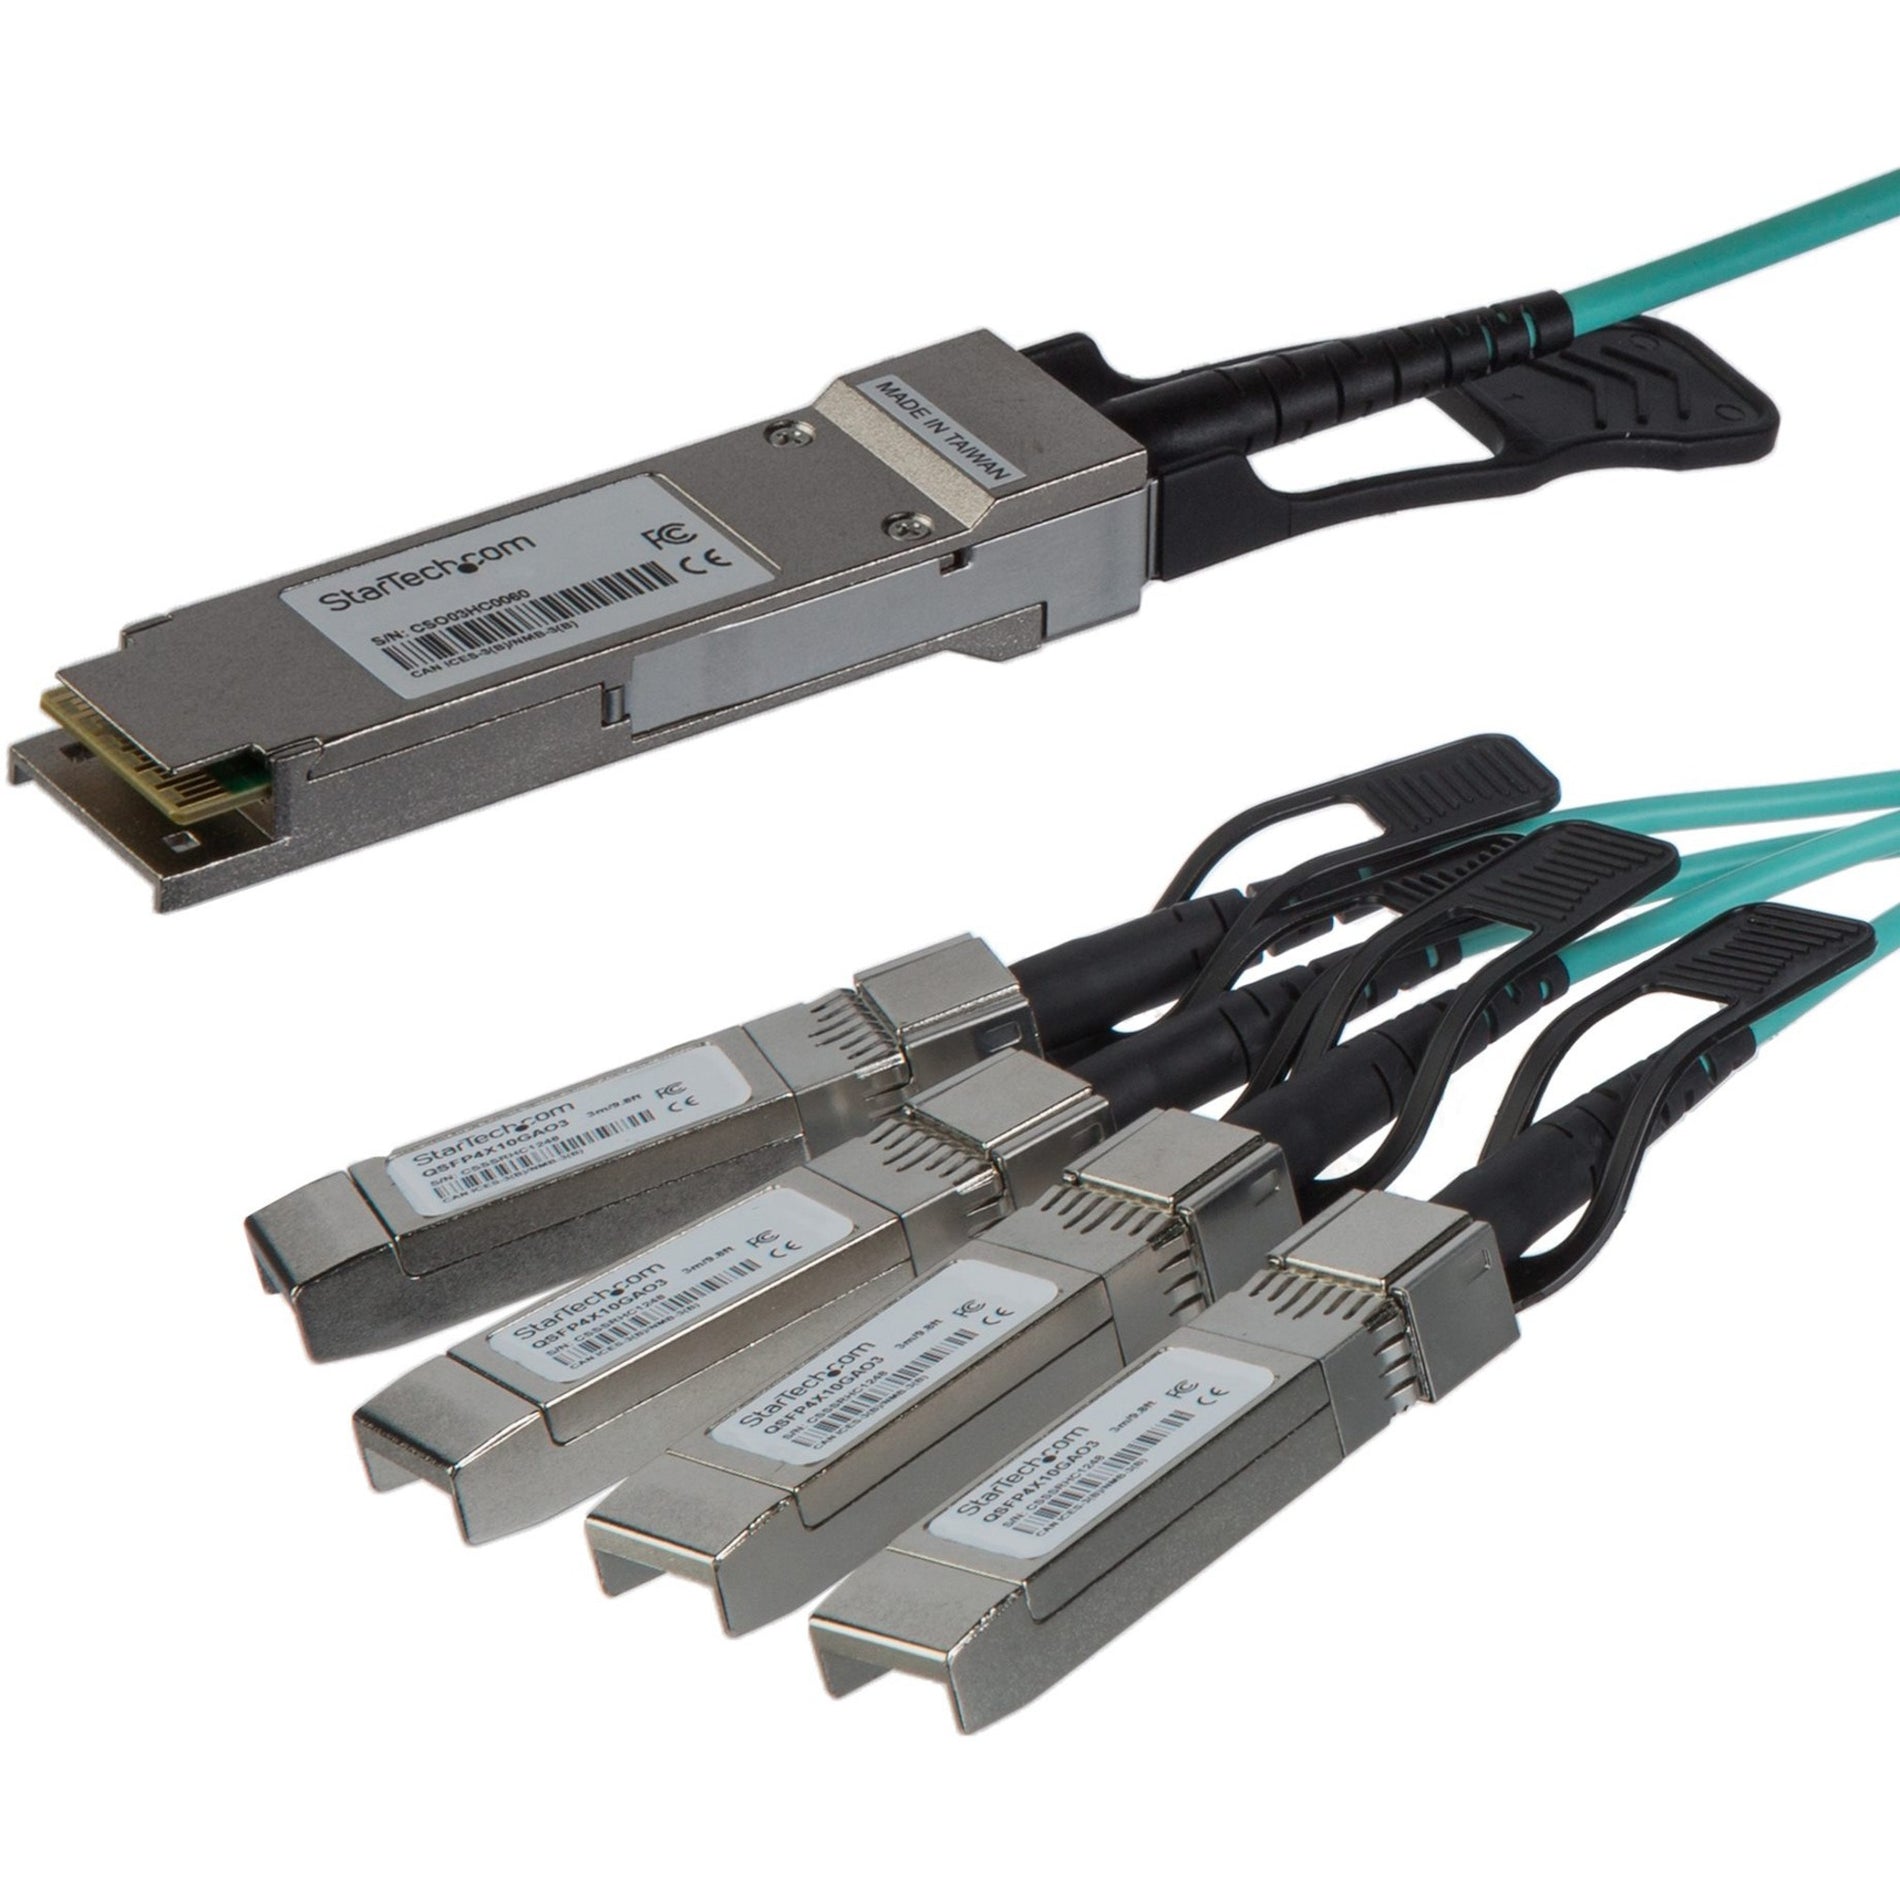 StarTech.com QSFP4X10GAO3 QSFP+ to 4x SFP+ - 3 m (9.8 ft.) Network Cable, Active, Hot-swappable, Flexible